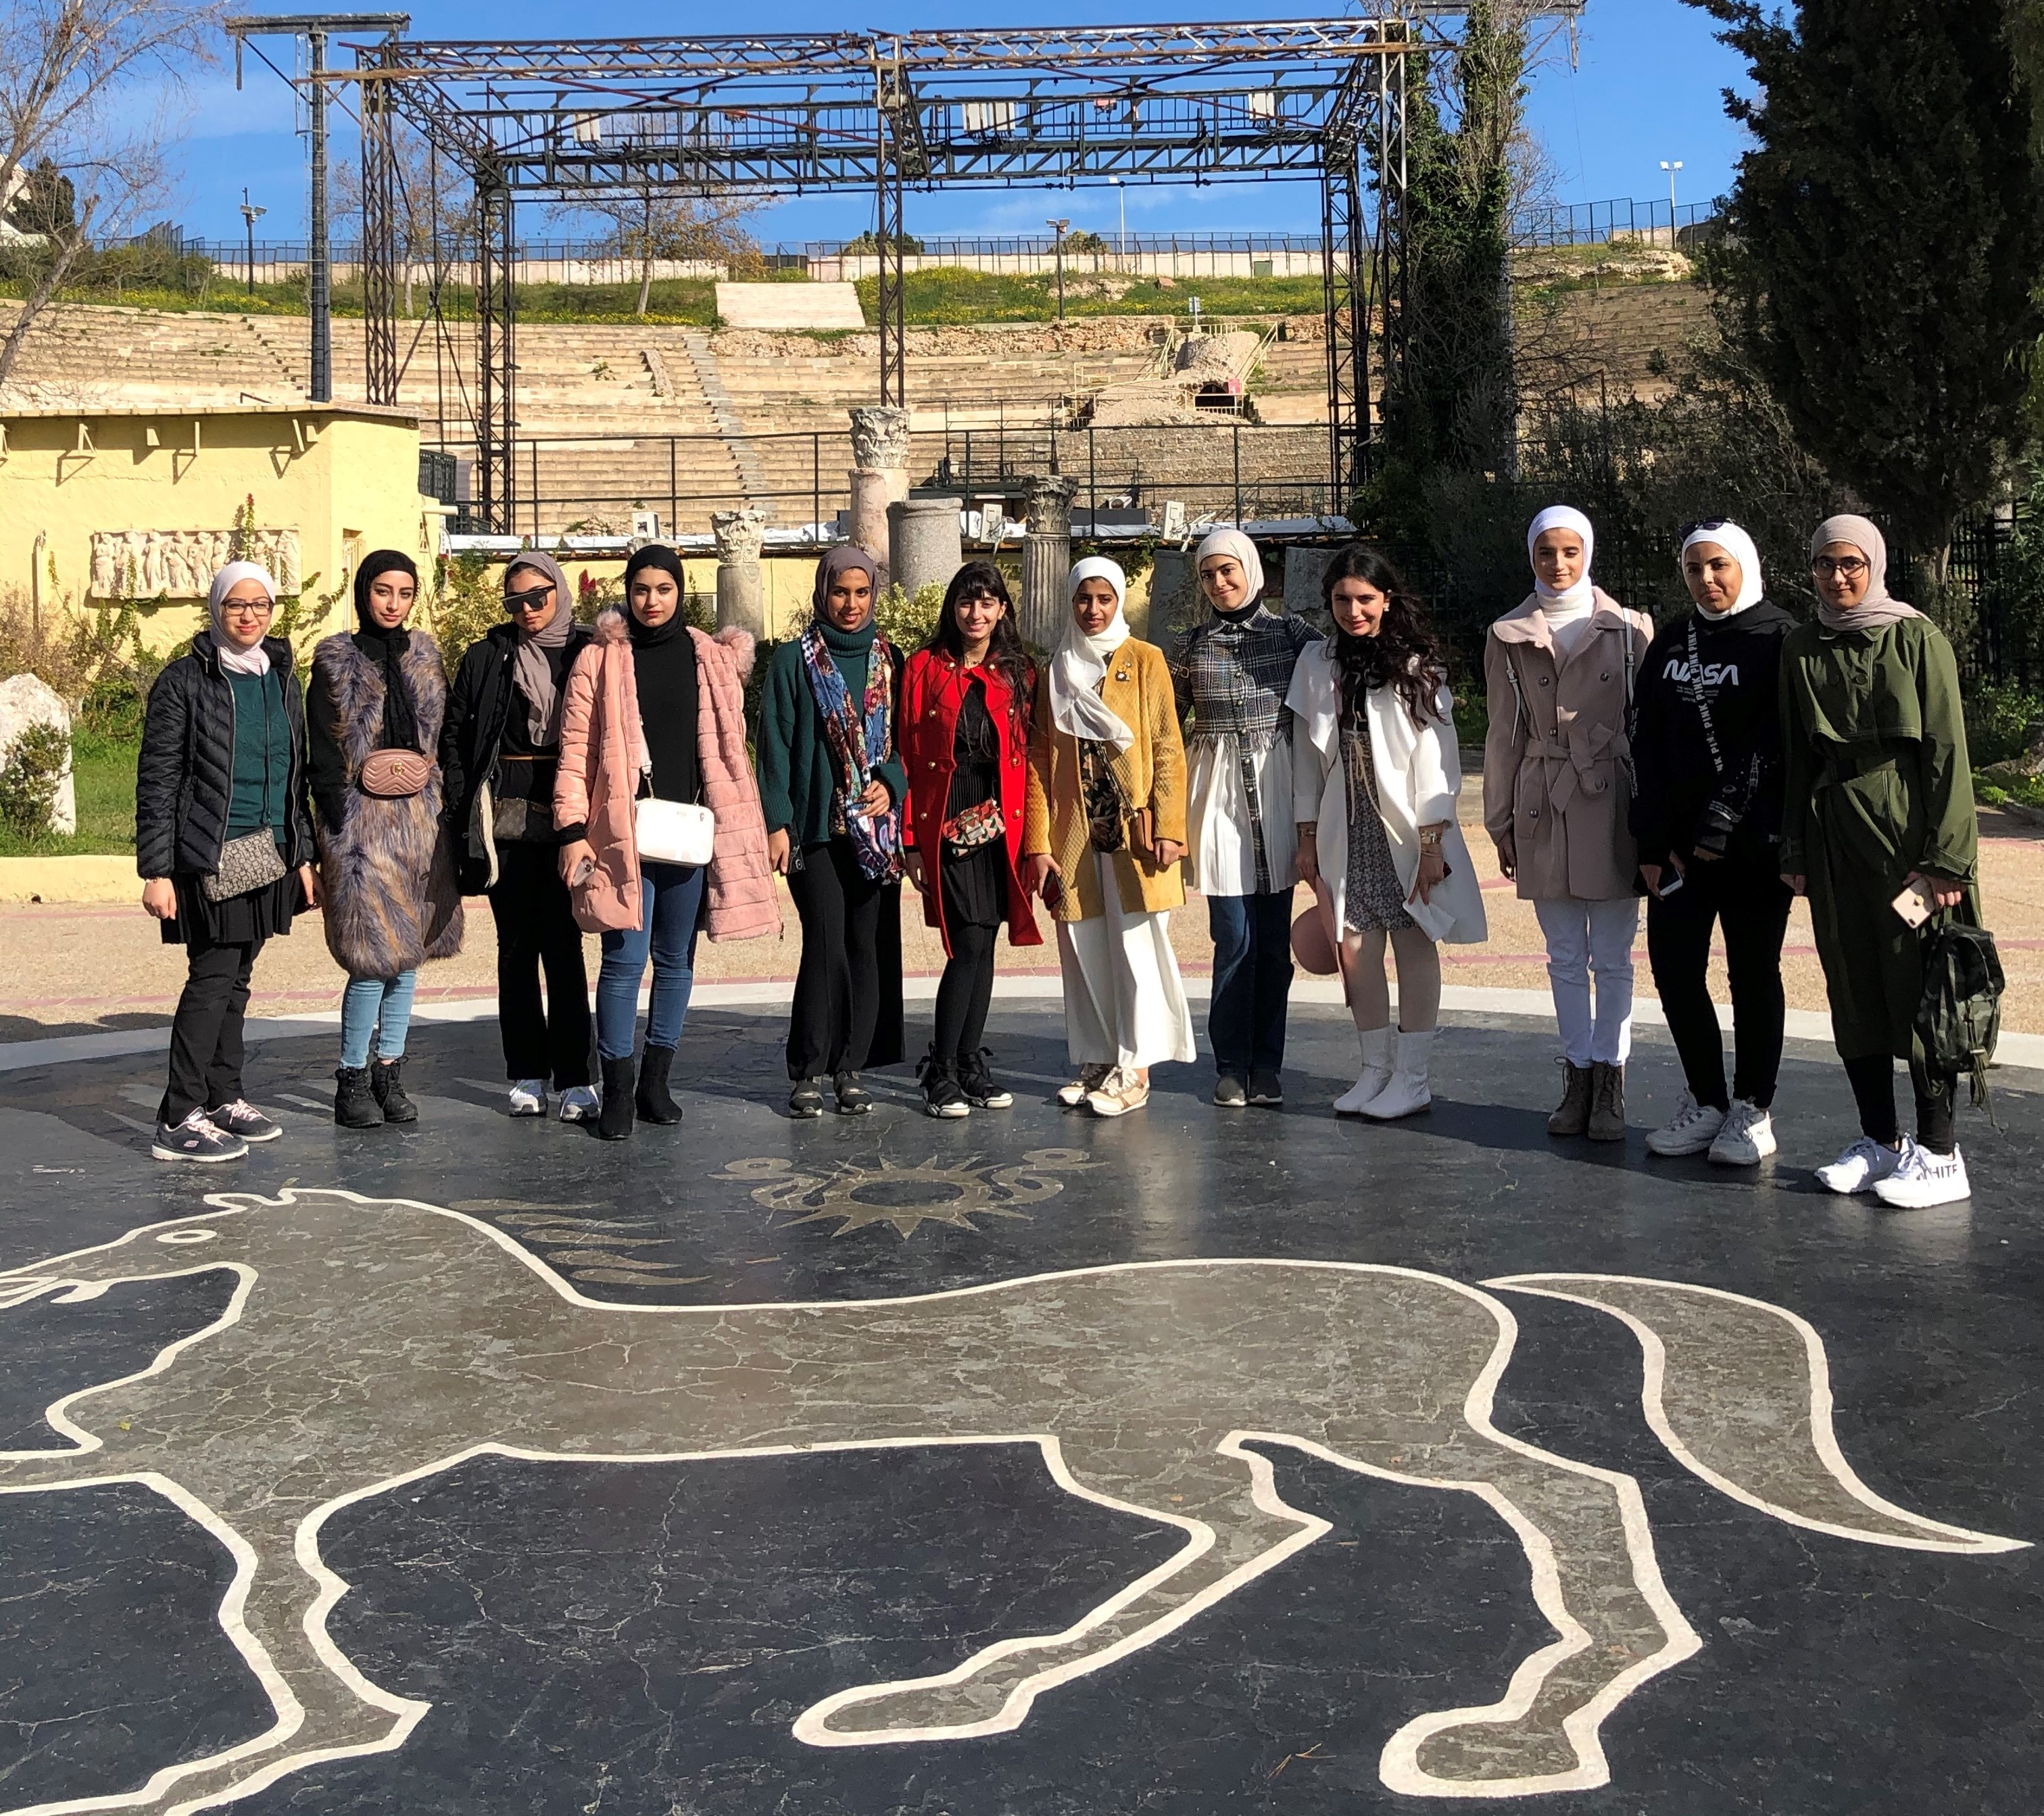 Girls group of Kuwaiti high schoolers visits ancient Carthage sites amid KFAED-funded trip